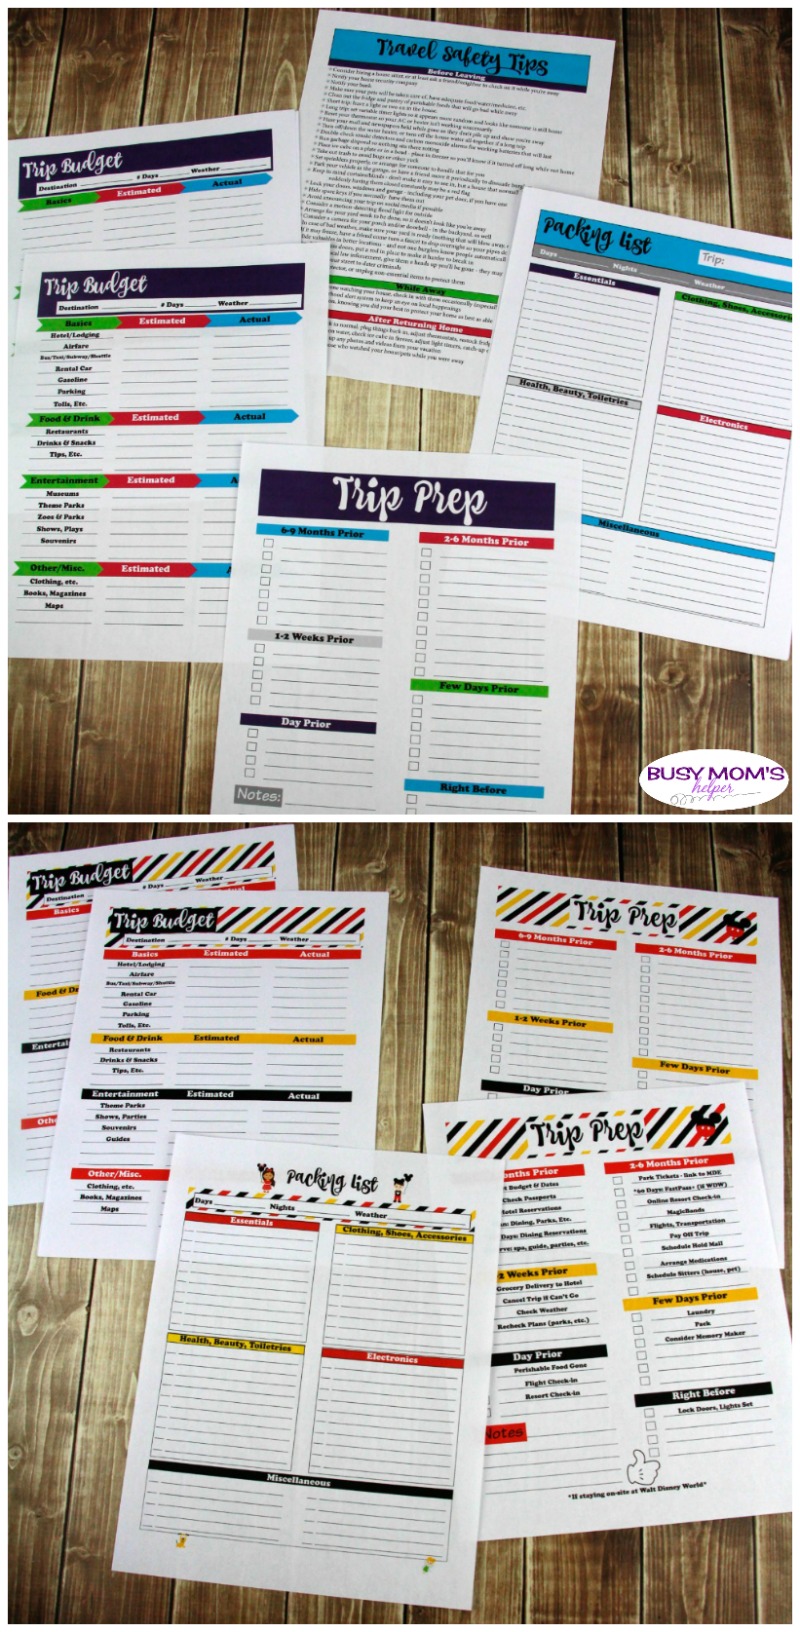 Ultimate Set of Printables for Busy Families! Practically every printable a busy family could use - over 70 pages PLUS two BONUS items! Help get organized with categories like: Money, Scheduling/Time Management, Kitchen/Meal Planning, Security & Home Management, as well as Trip Planning! #printables #busymom #busyparents #busyfamily #busyfamilies #printableset #parenting #moms #money #homemanagement #timemanagement